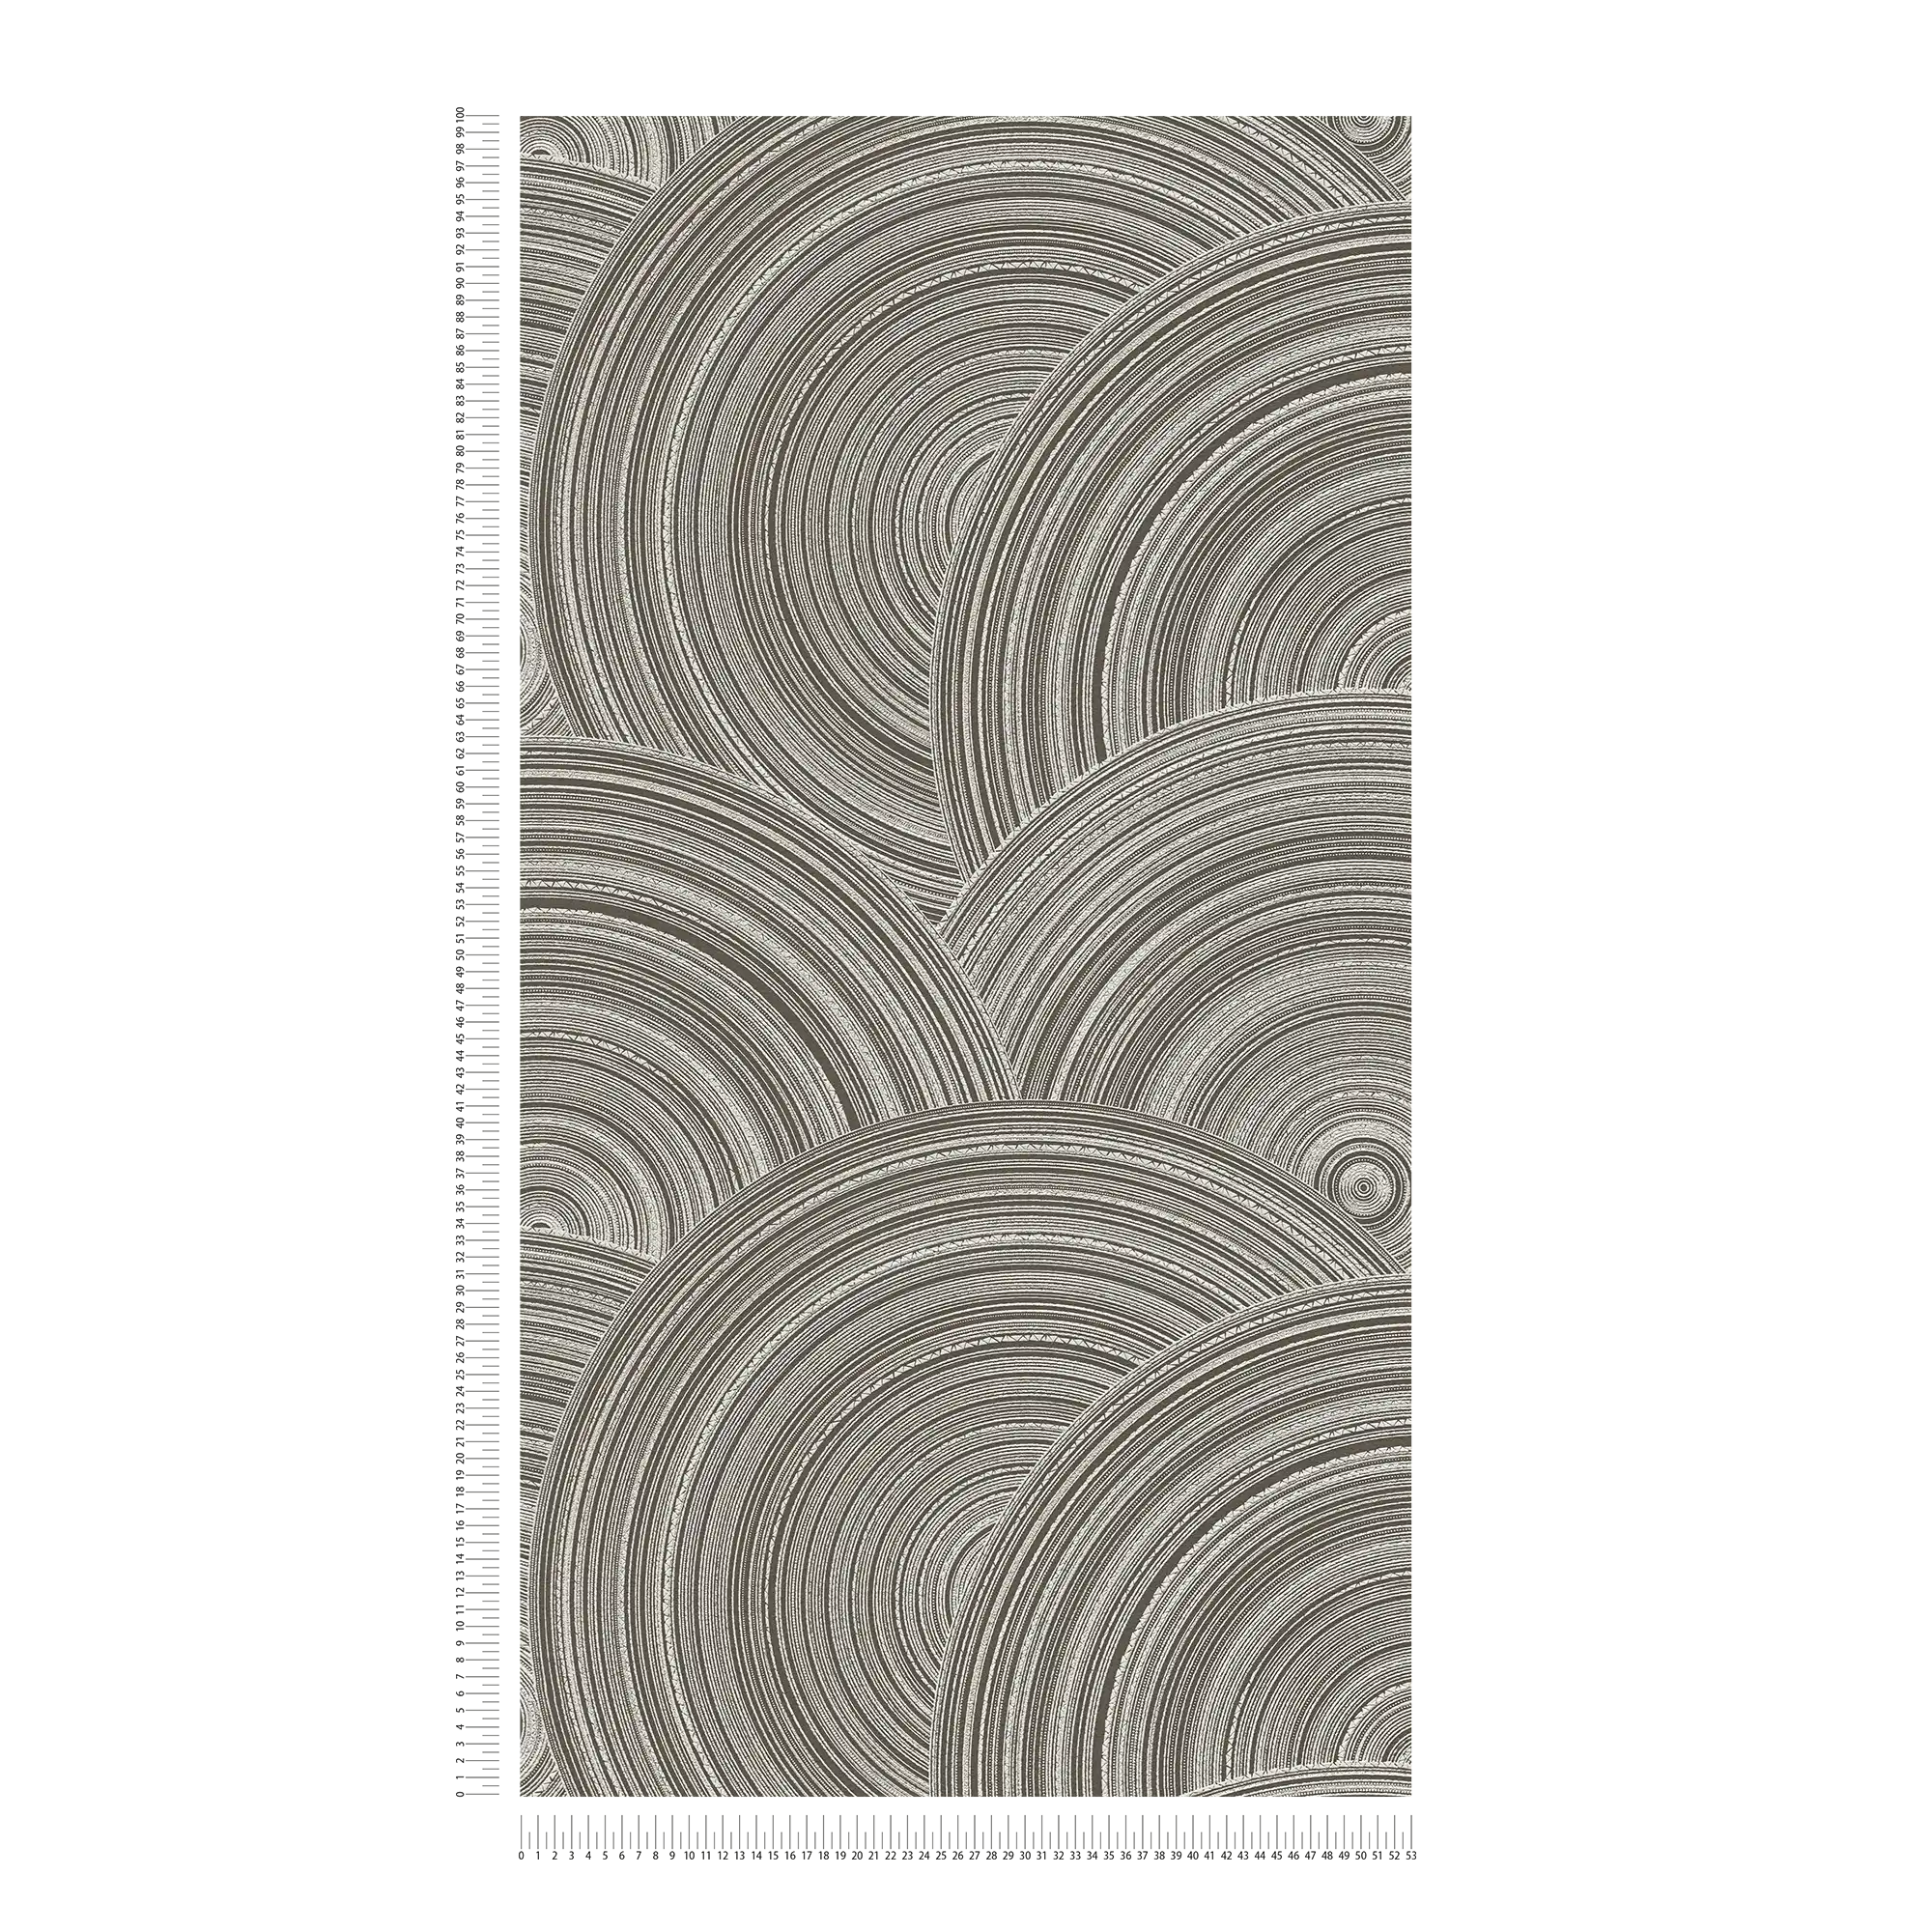             Circle wallpaper with ethno design with texture effect - brown, cream
        